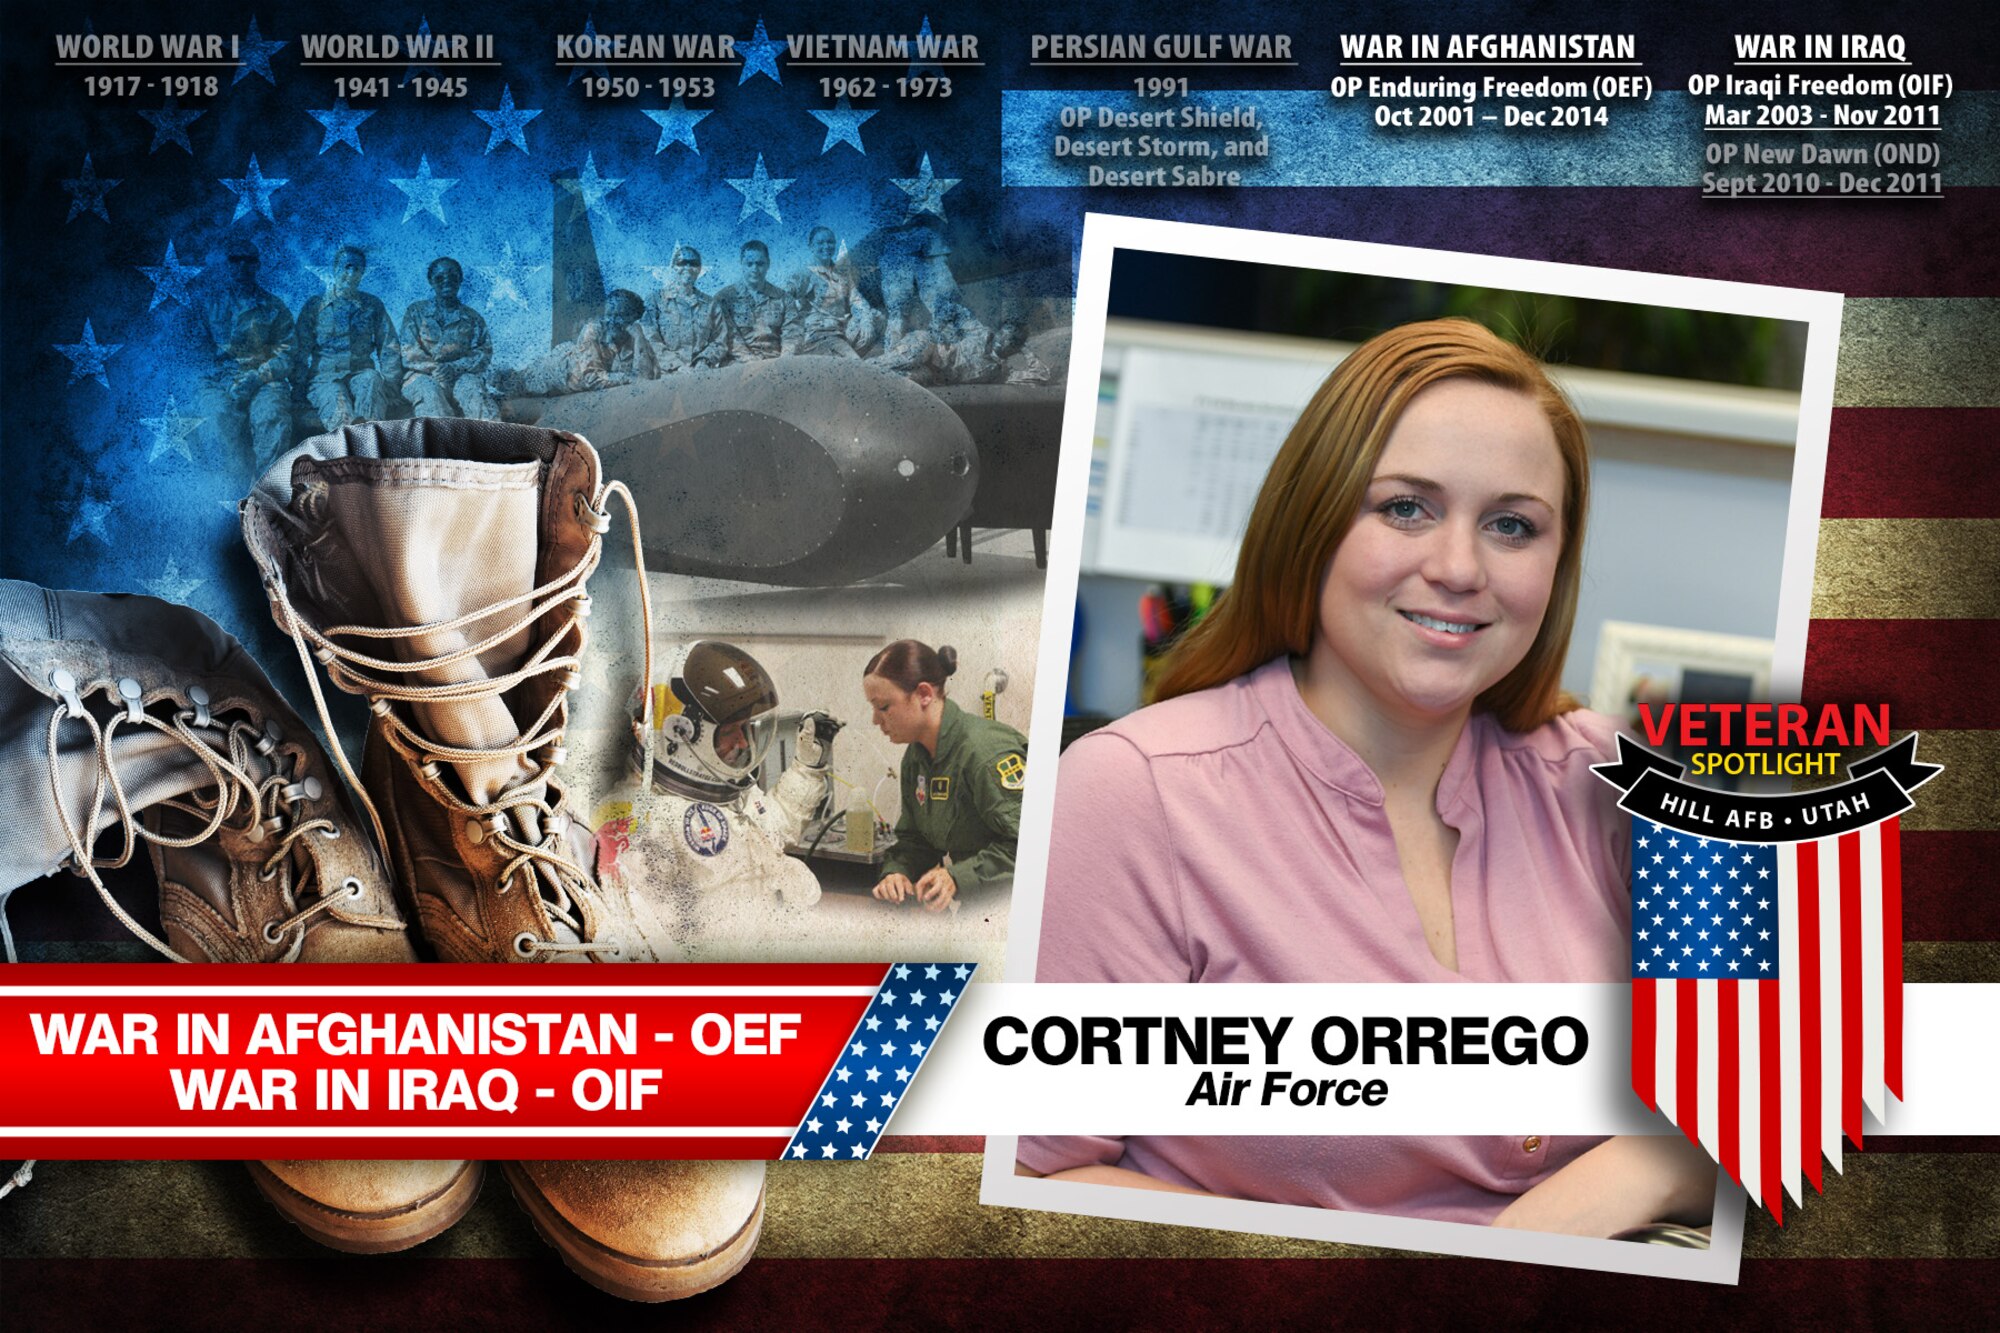 Today's spotlight is U.S. Air Force veteran Cortney Orrego. (U.S. Air Force illustration by David Perry)